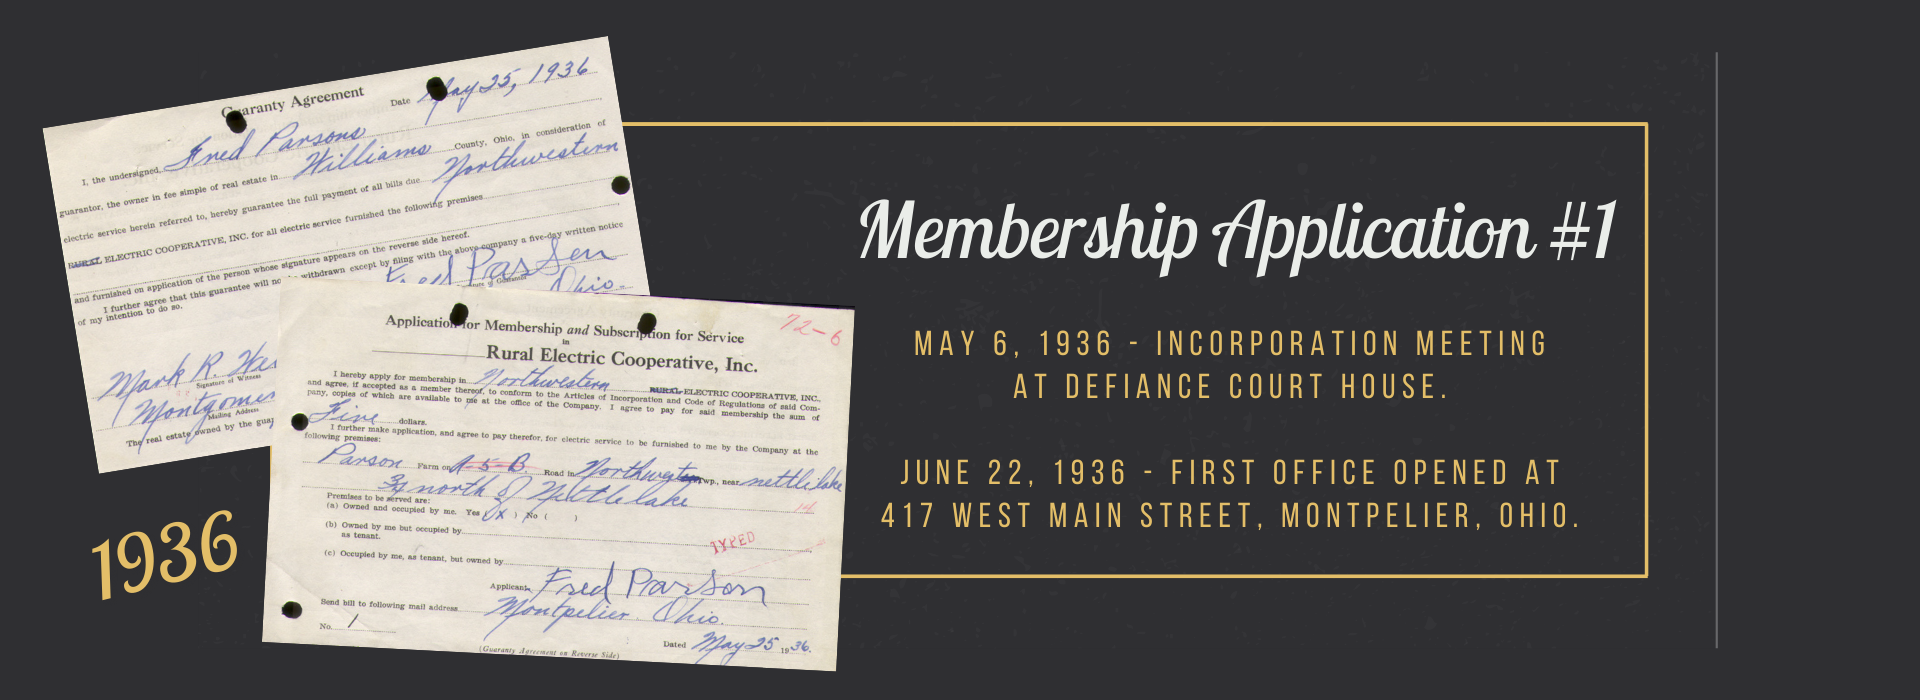 May 6, 1936 - Incorporation meeting  at Defiance Court House.   June 22, 1936 - First office opened at  417 West Main Street, Montpelier, OHio. 